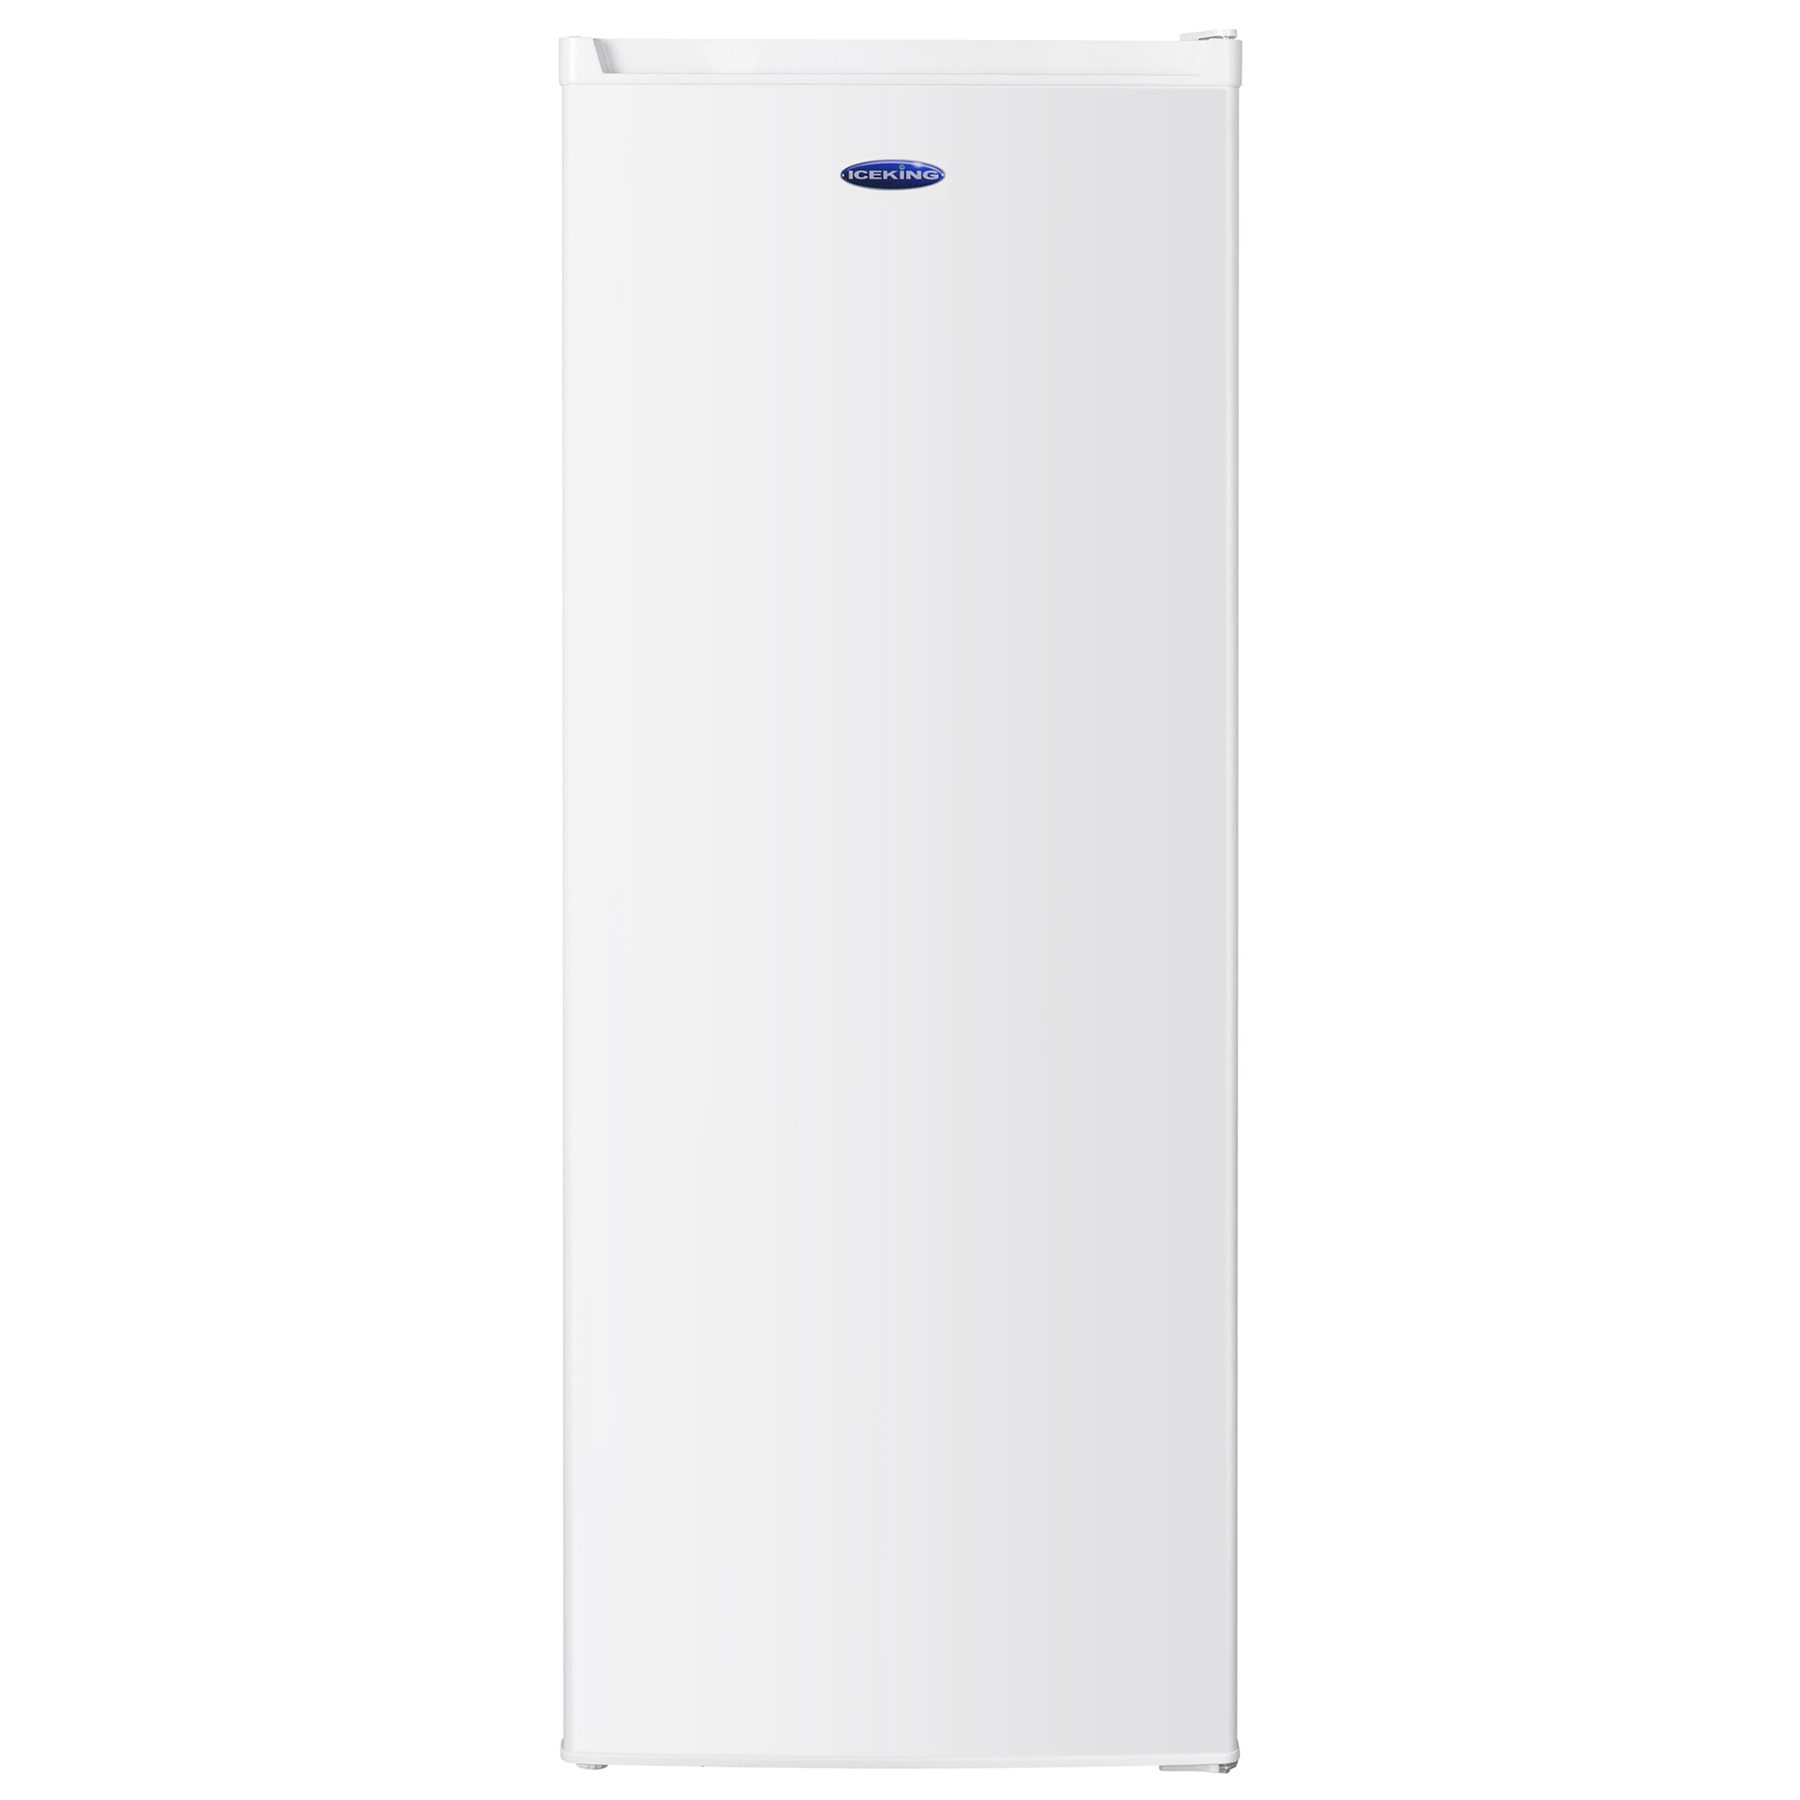 Image of Iceking RZ204EW 55cm Tall Freezer in White 1 43m 168L E Rated